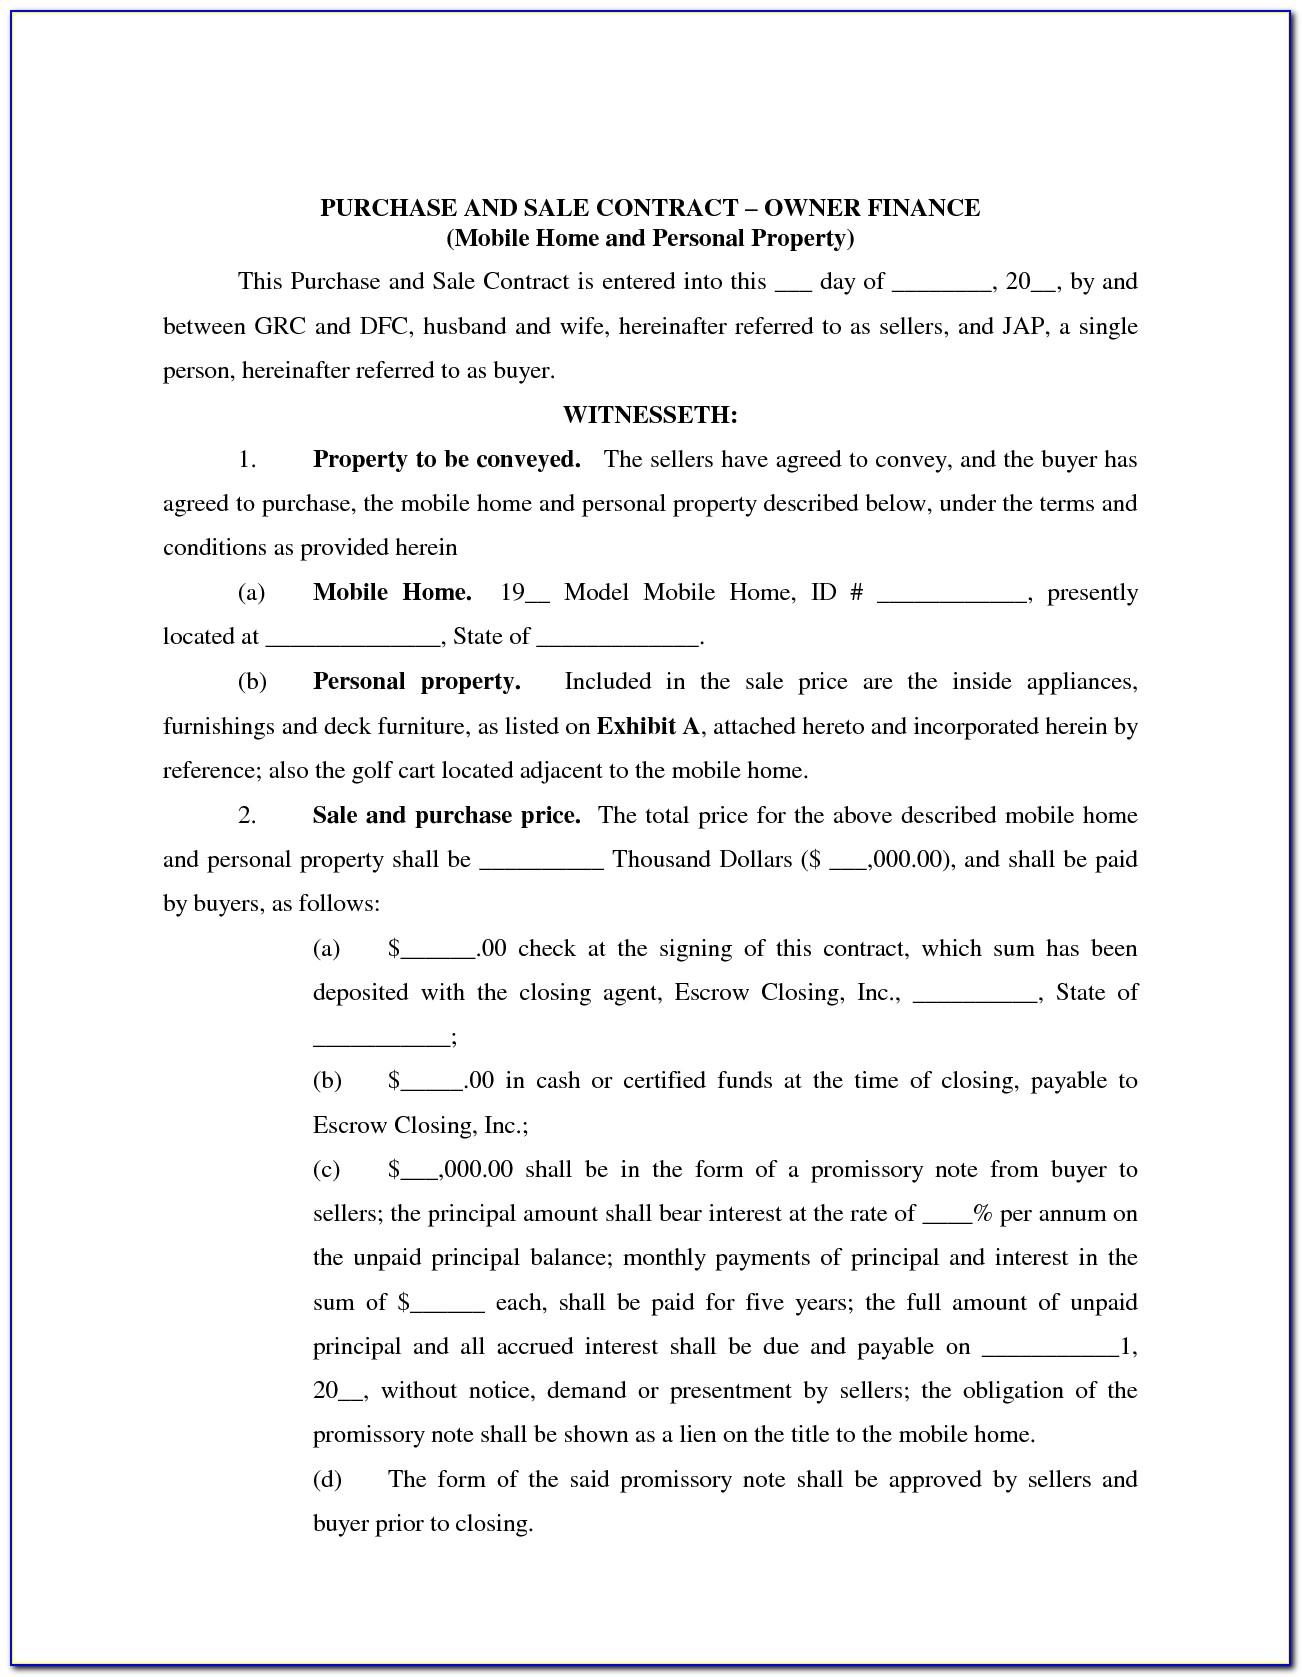 Owner Finance Agreement Template Free